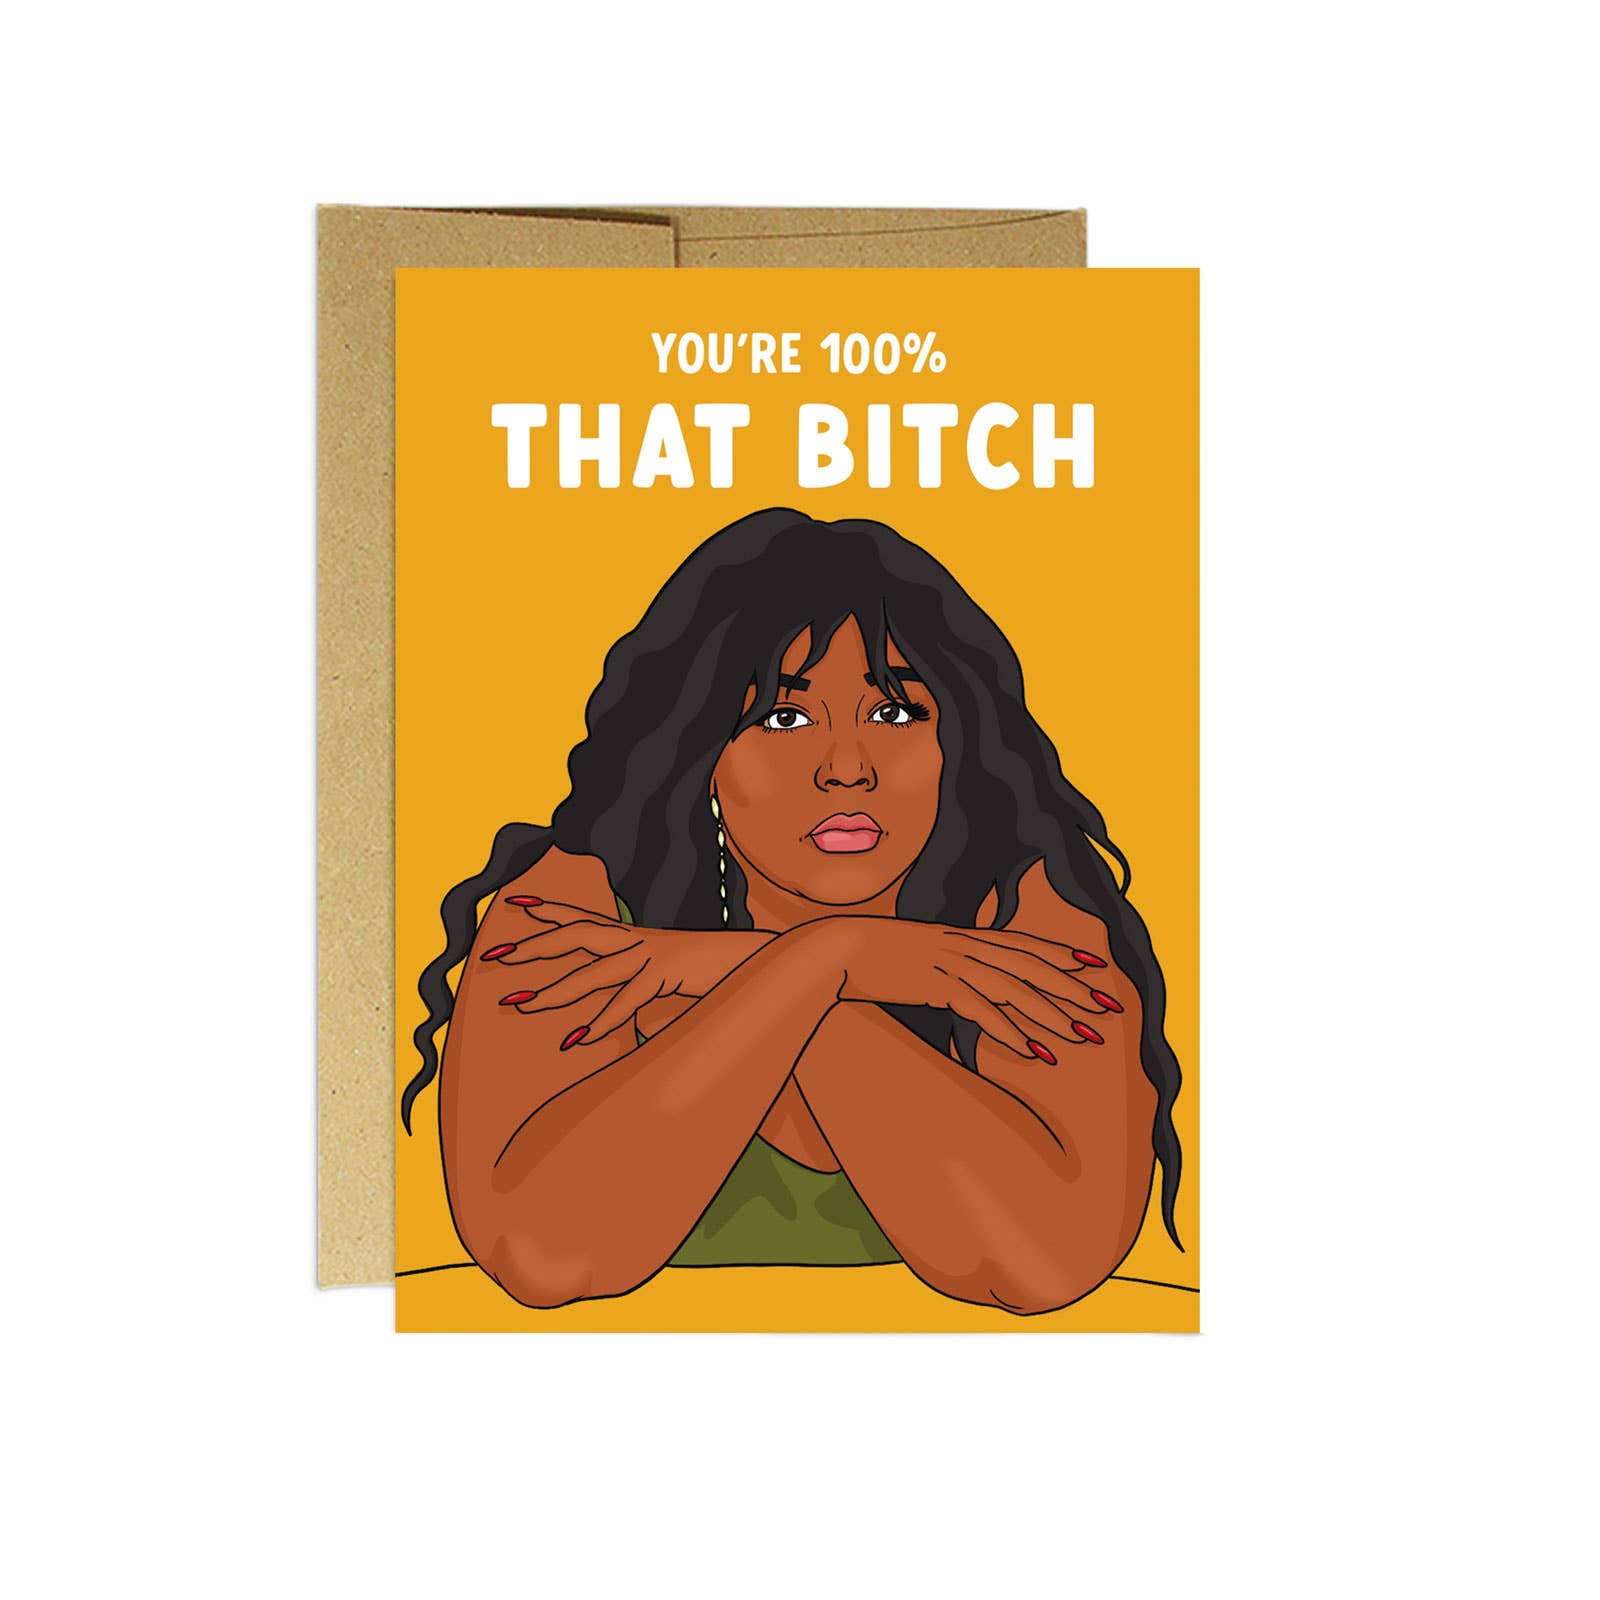 "You're 100% that bitch" white text on gold background with artistic drawing of Lizzo in a green top.